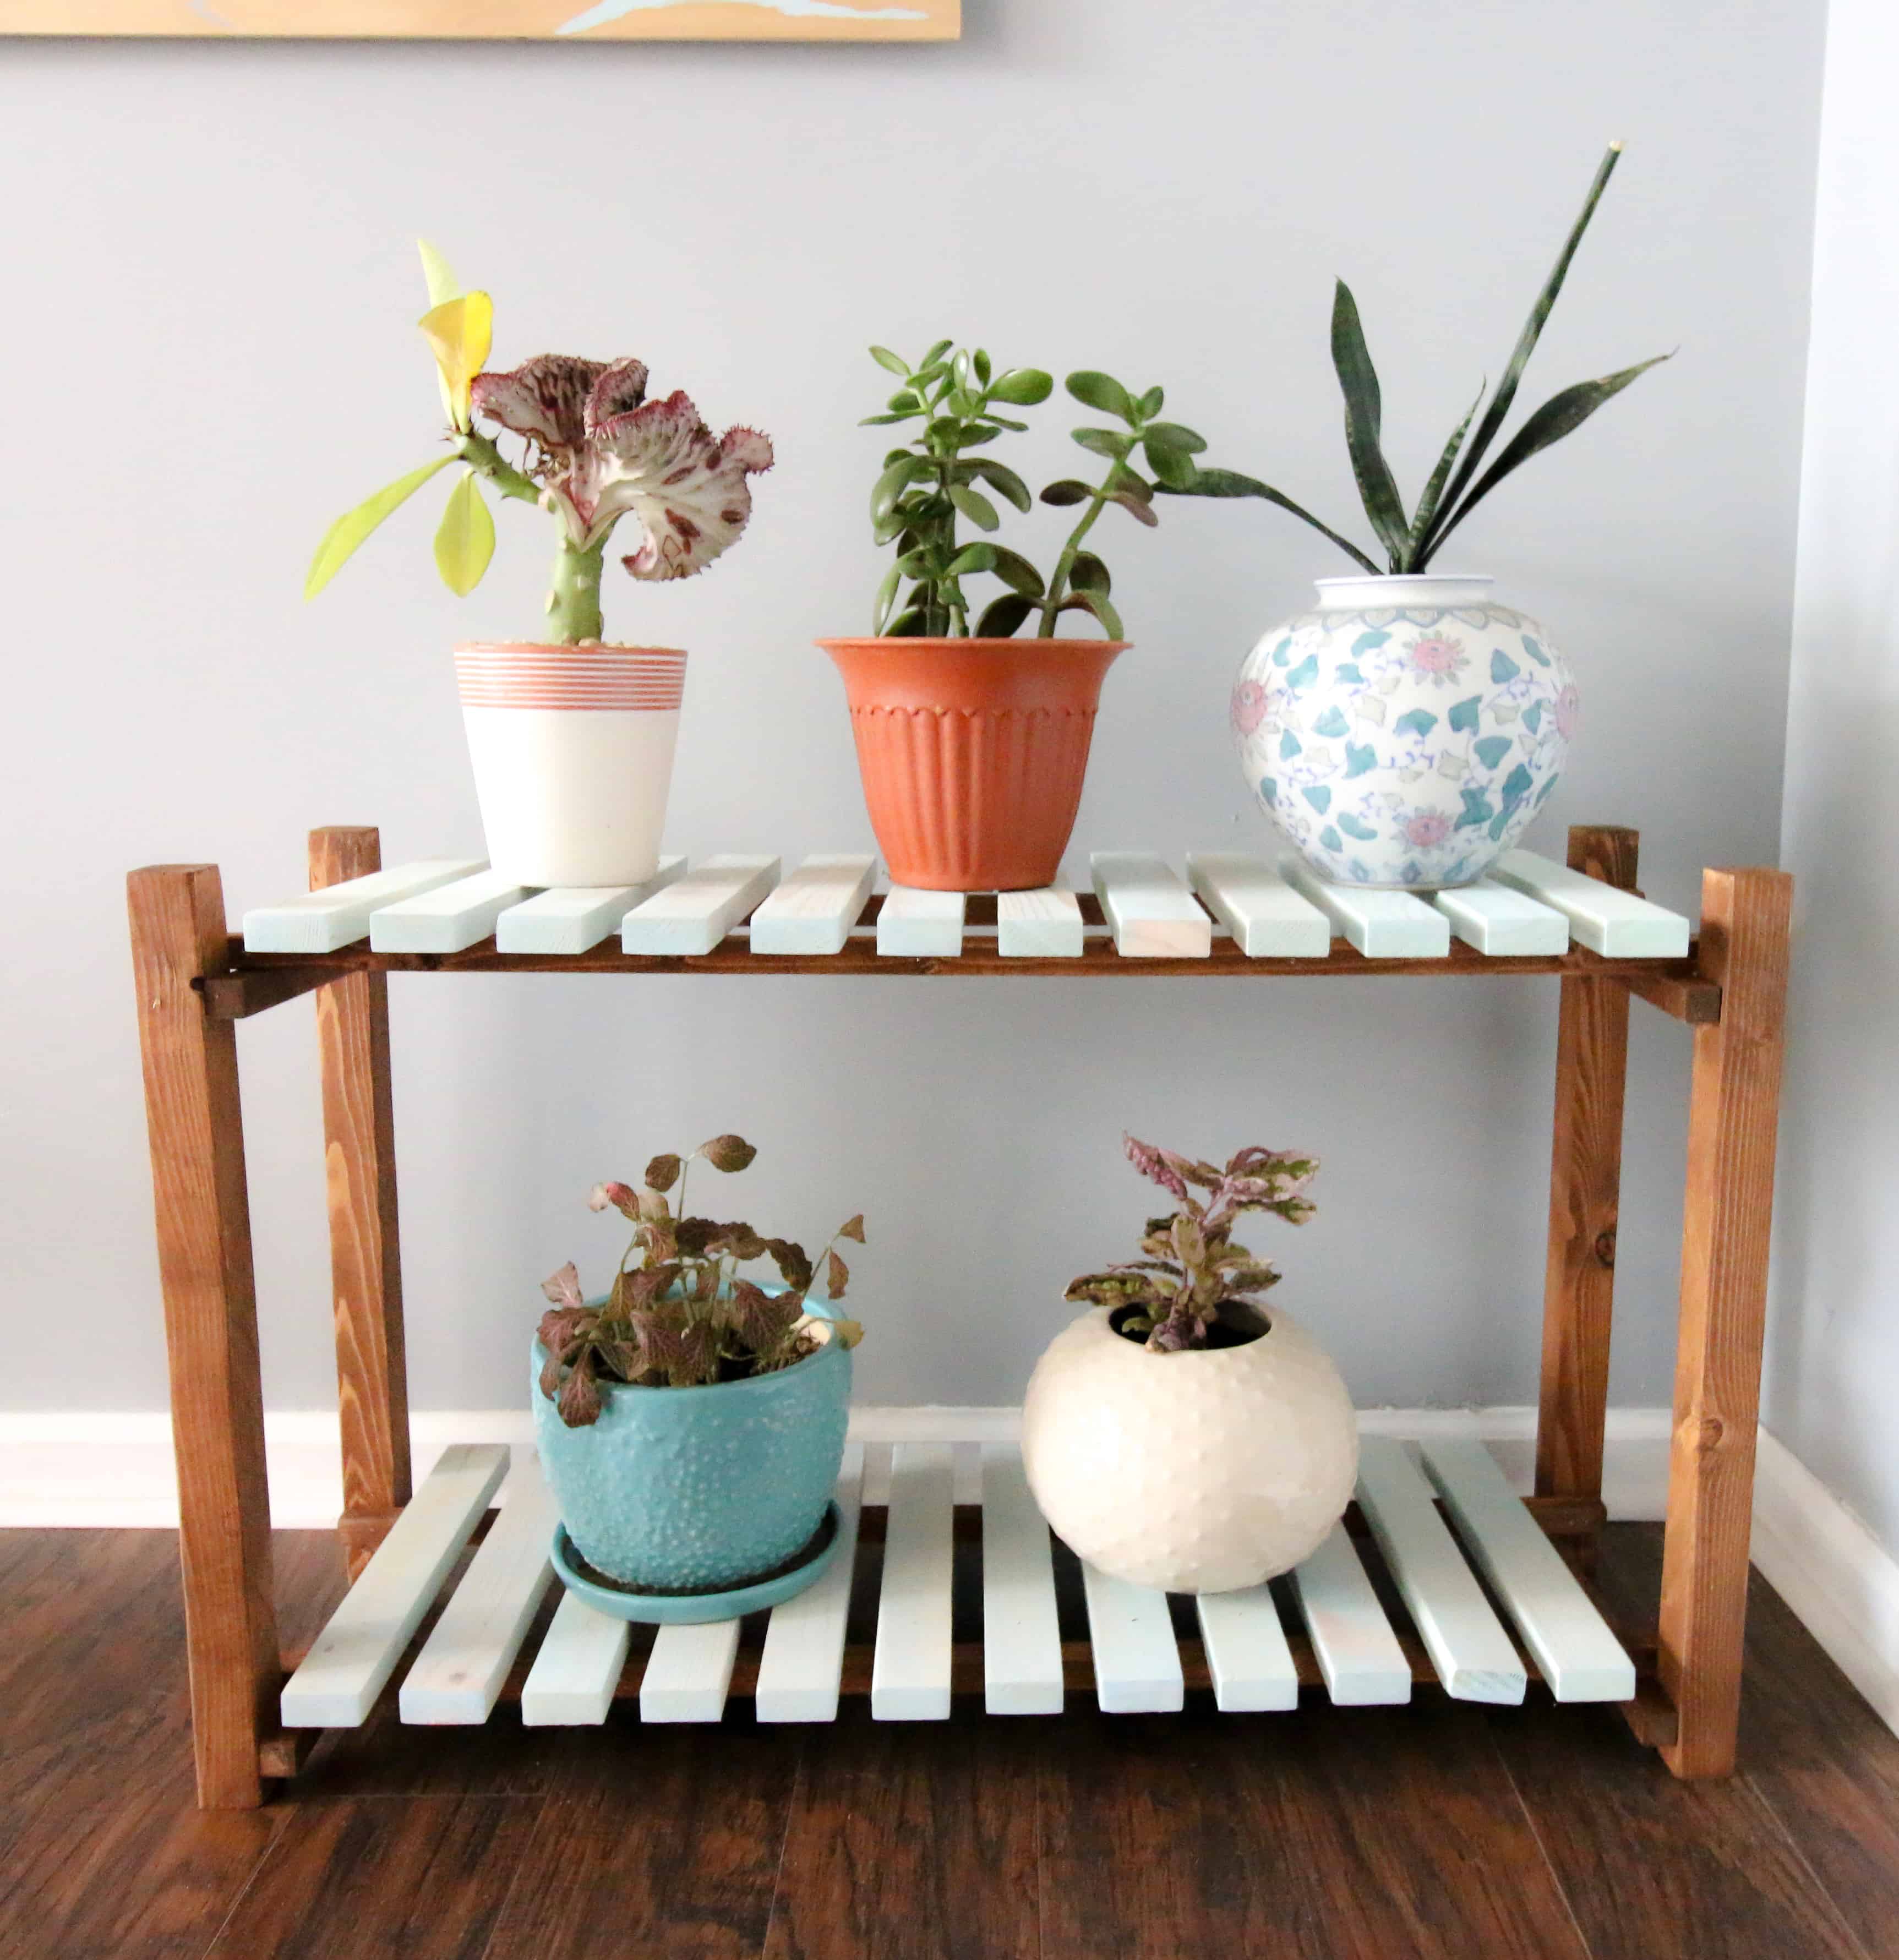 Creative How To Make A Plant Stand Easy for Simple Design